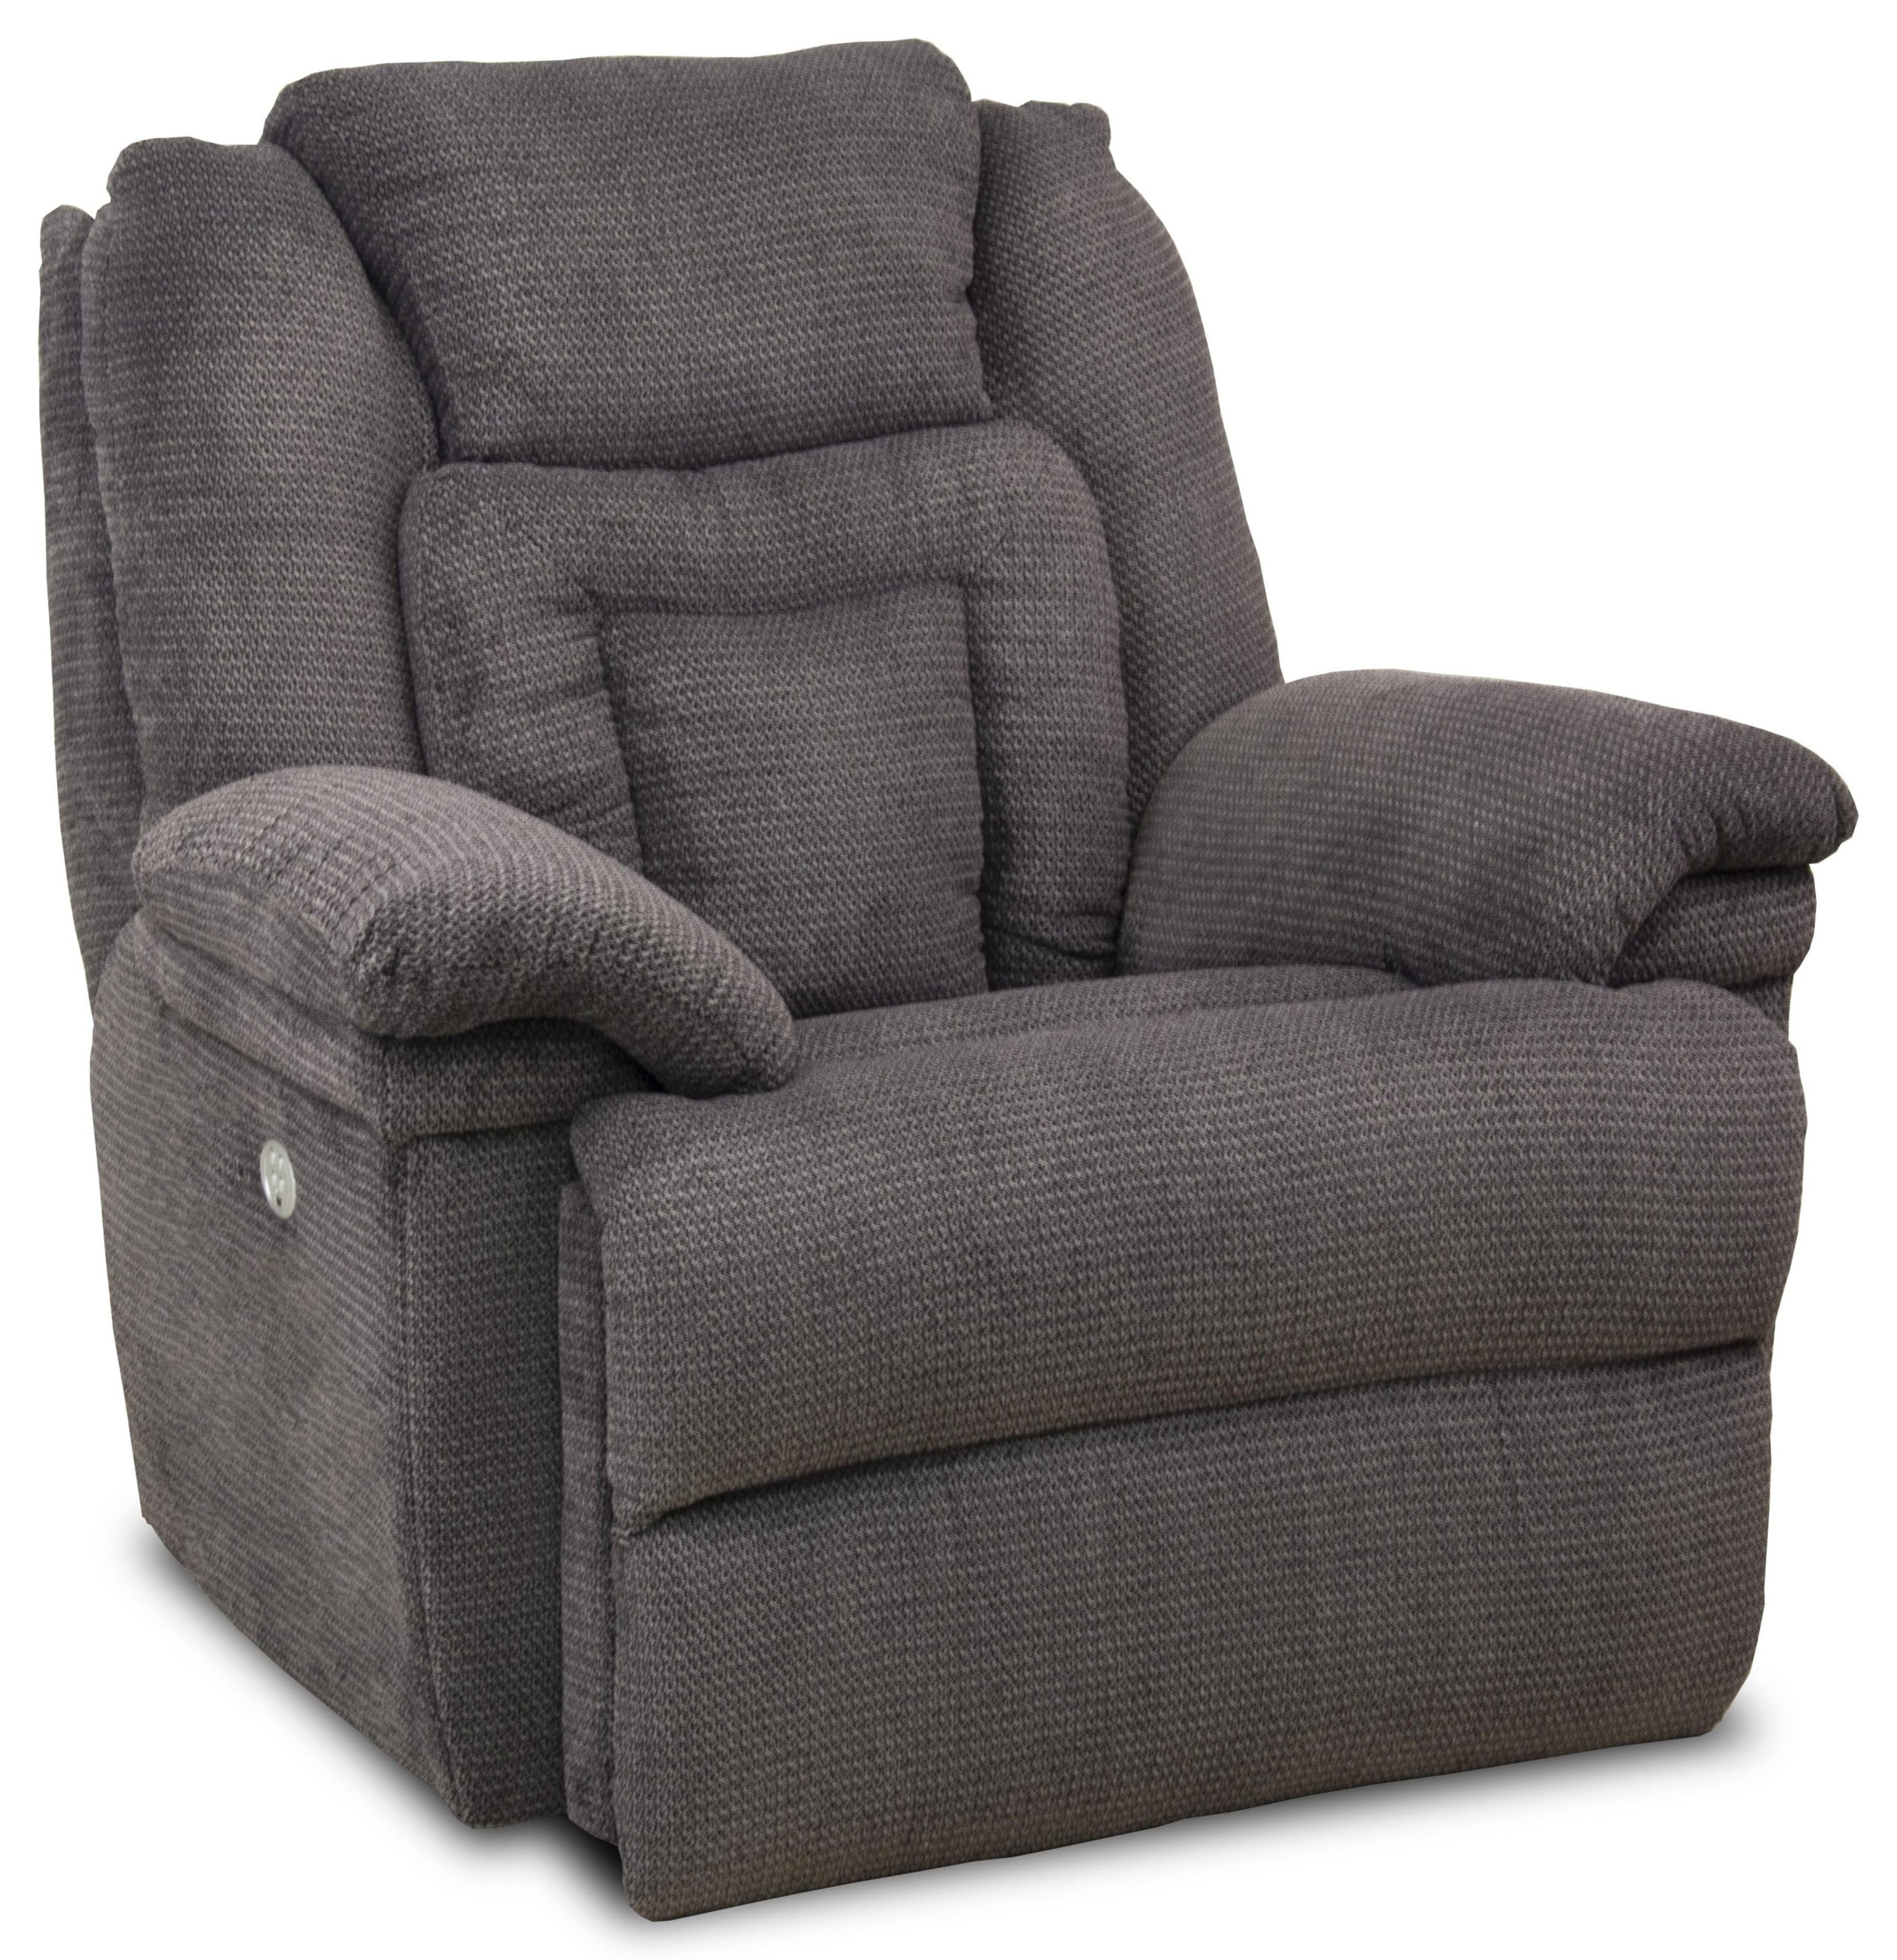 Best oversized recliner top big man recliners for tall